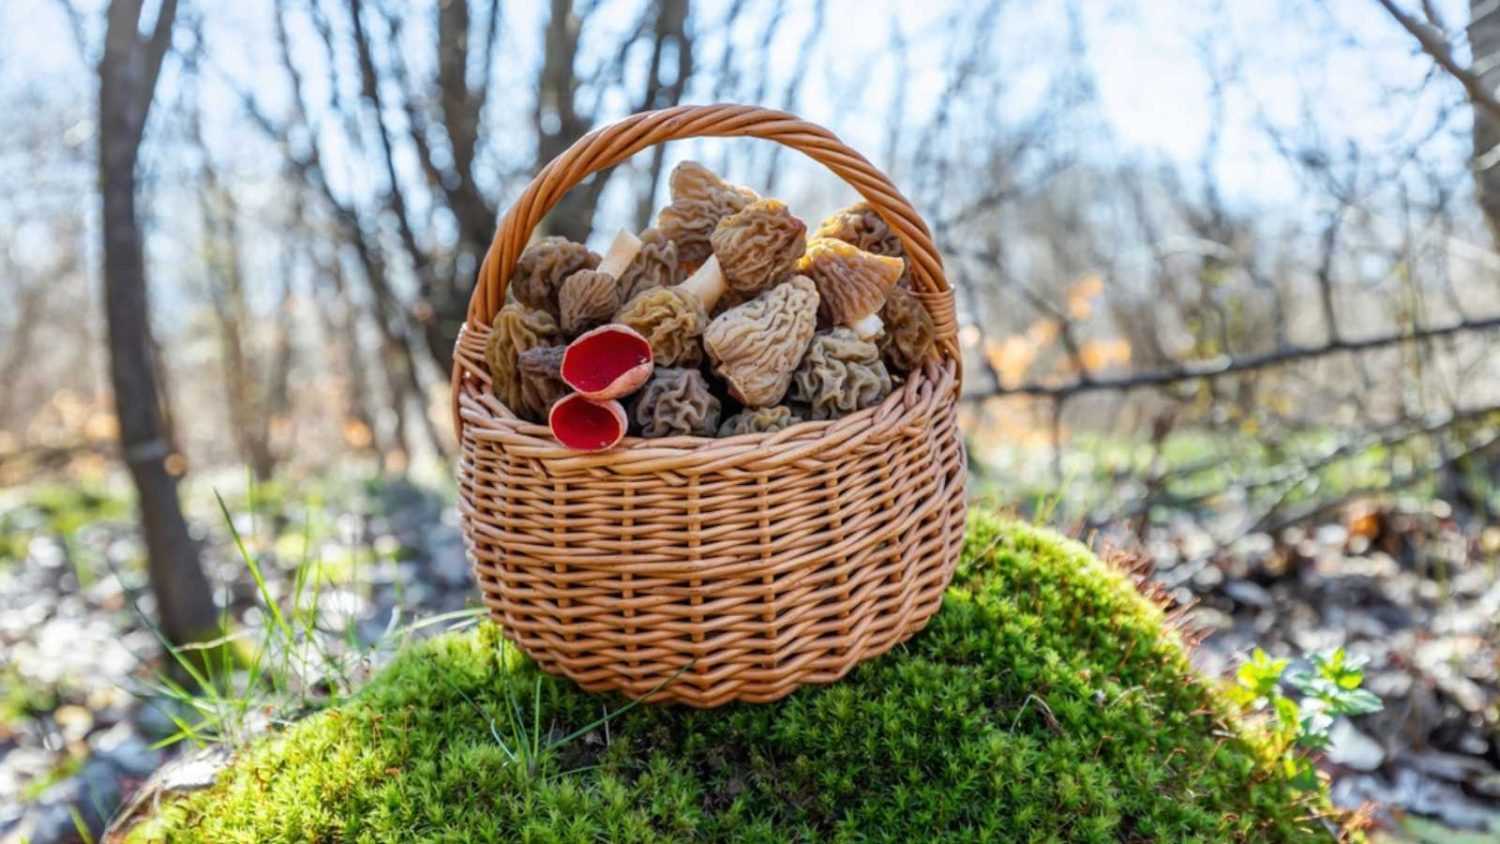 Wicker basket full of fresh picked spring mushrooms in the forest. Verpa bohemica (early morel) and Sarcoscypha coccinea (scarlet cup).